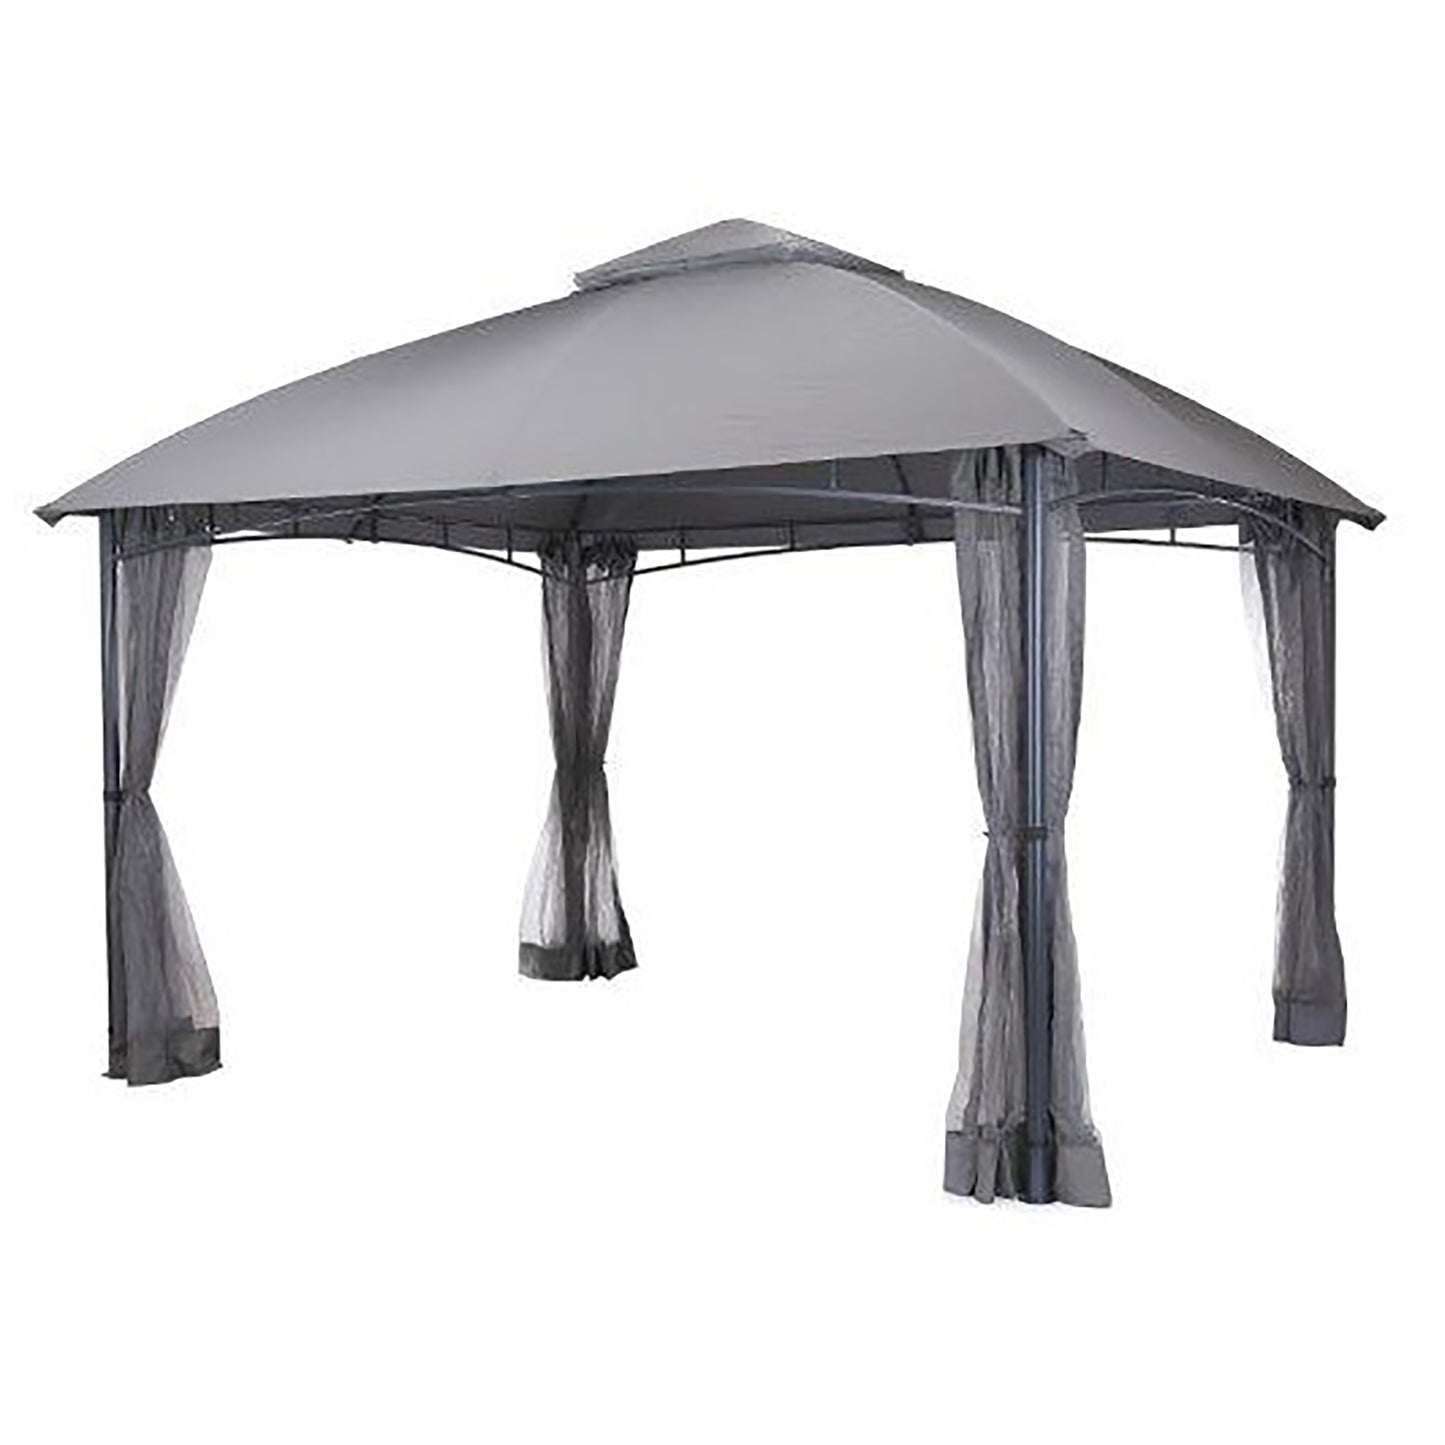 Canopy for 3m x 3.6m Homebase Dome Patio Gazebo - Two Tier